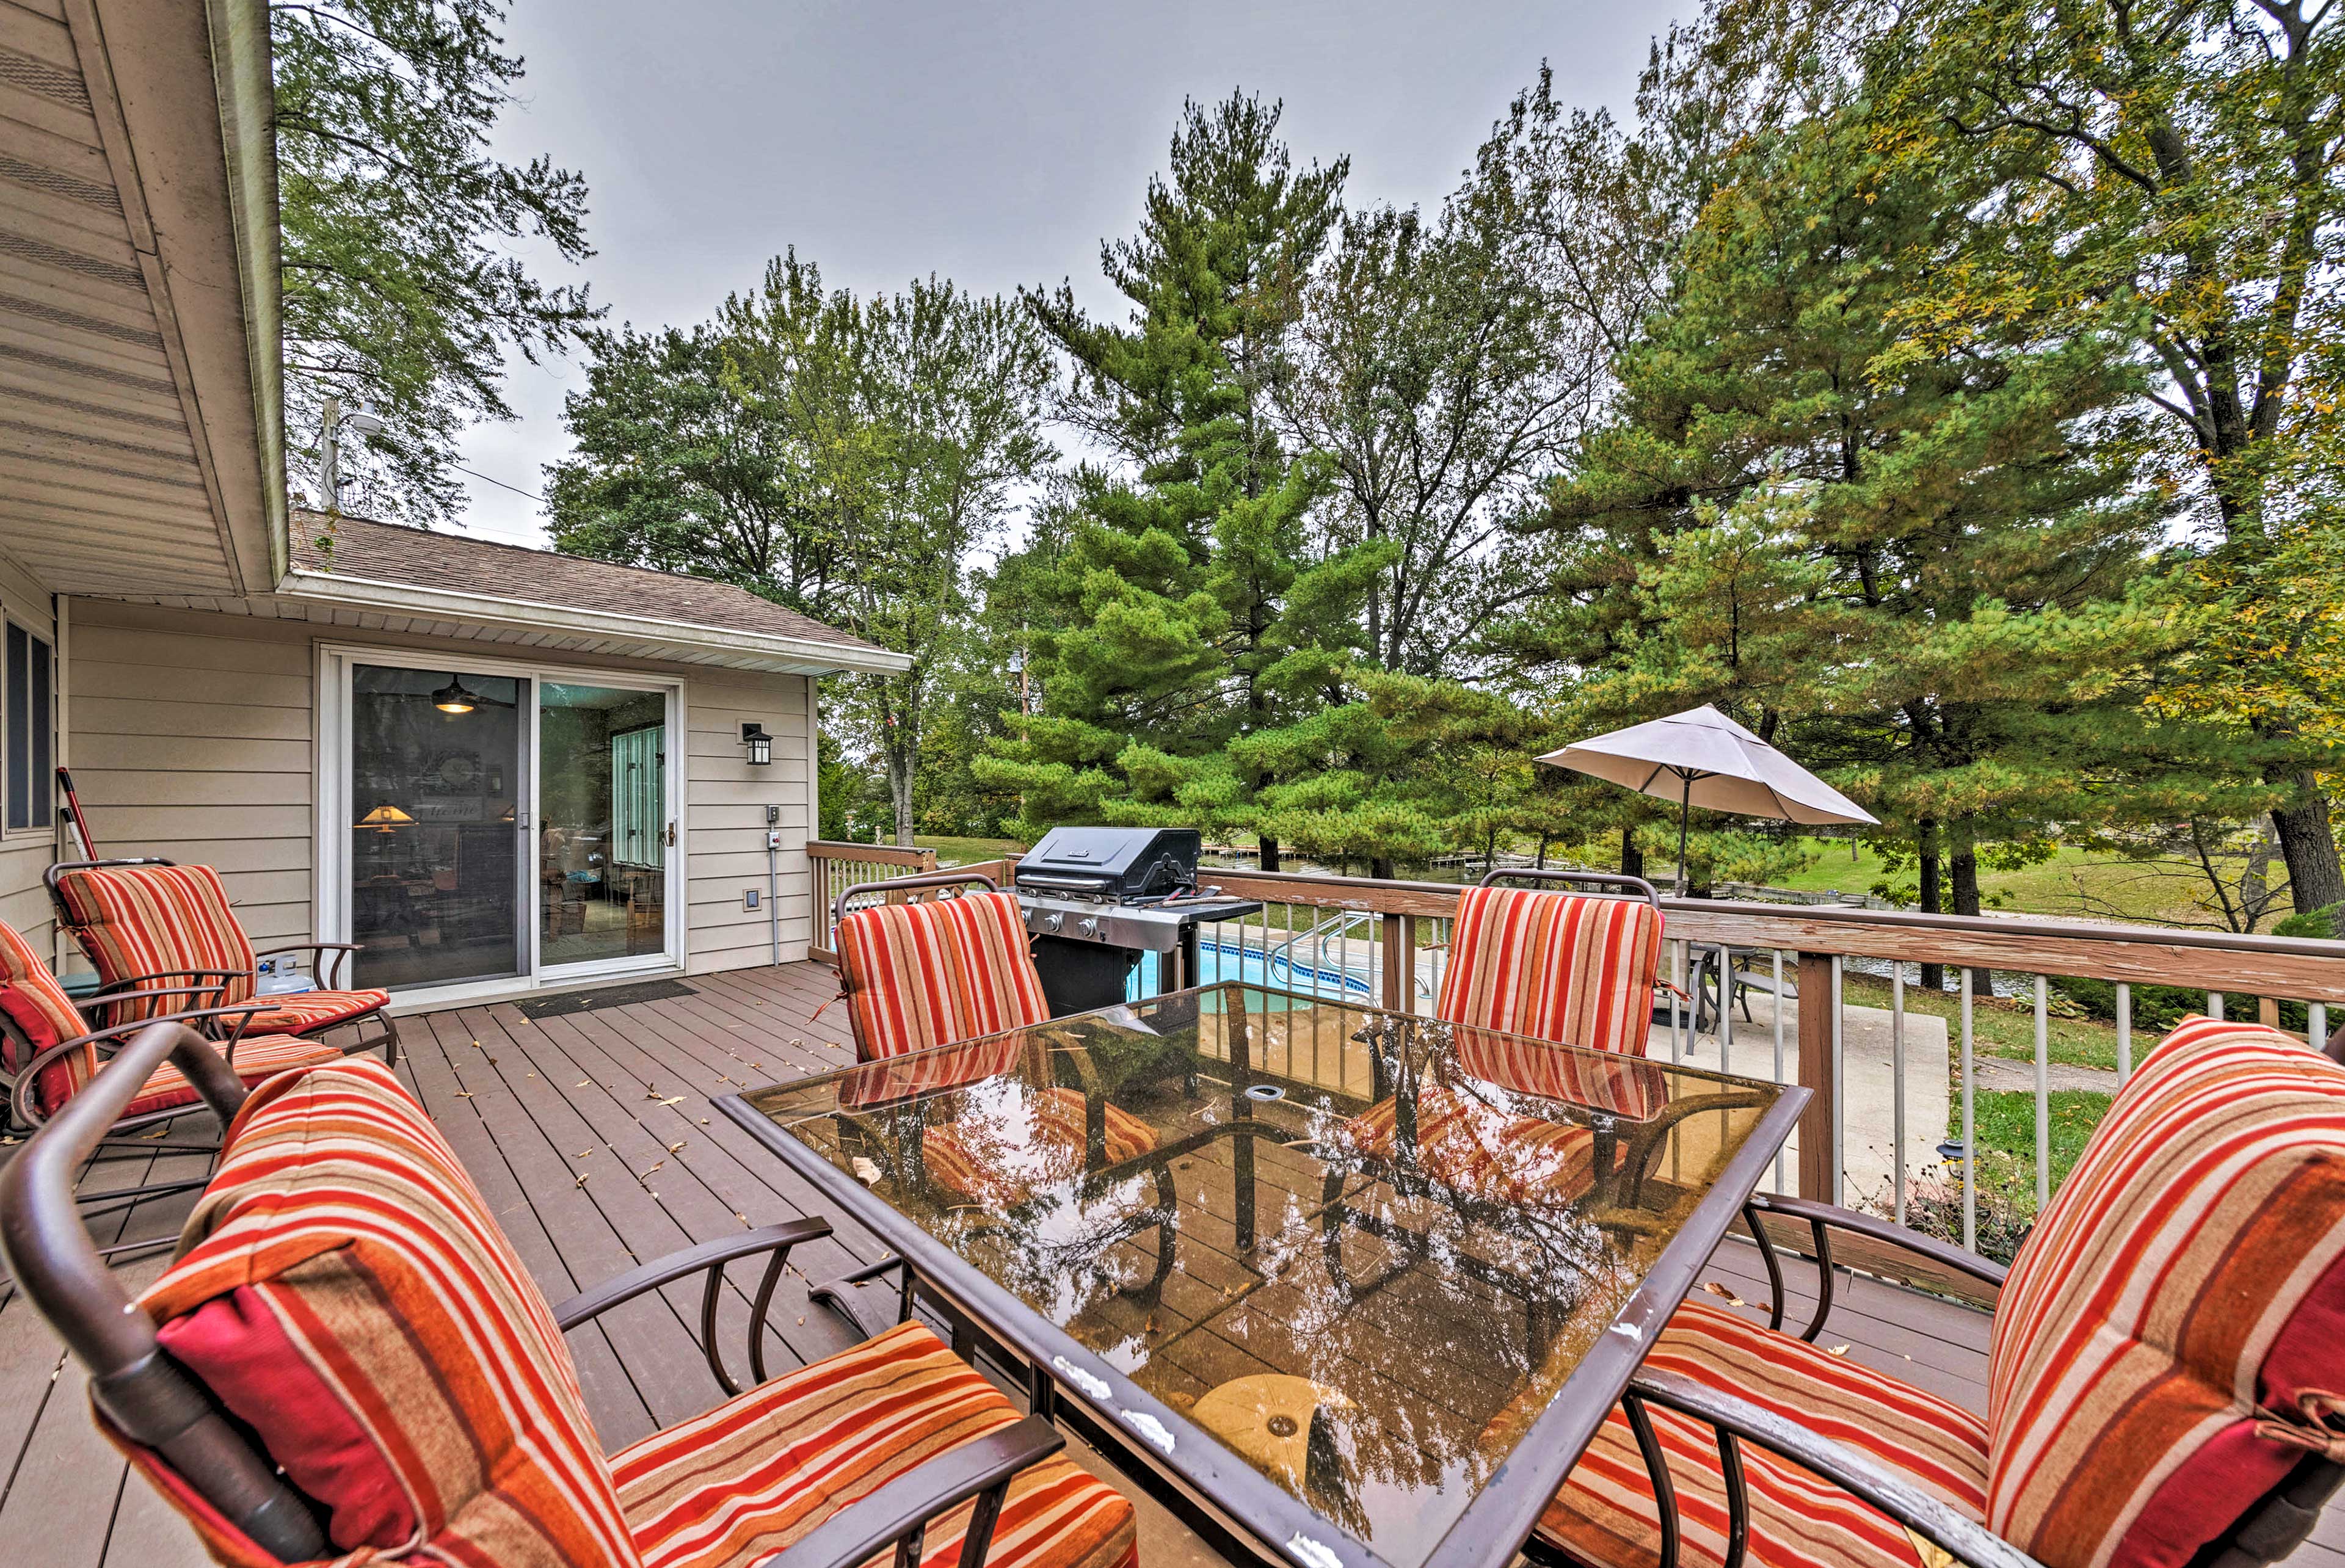 Property Image 2 - Family Home w/ Deck on Lake Sara: Pets are Welcome